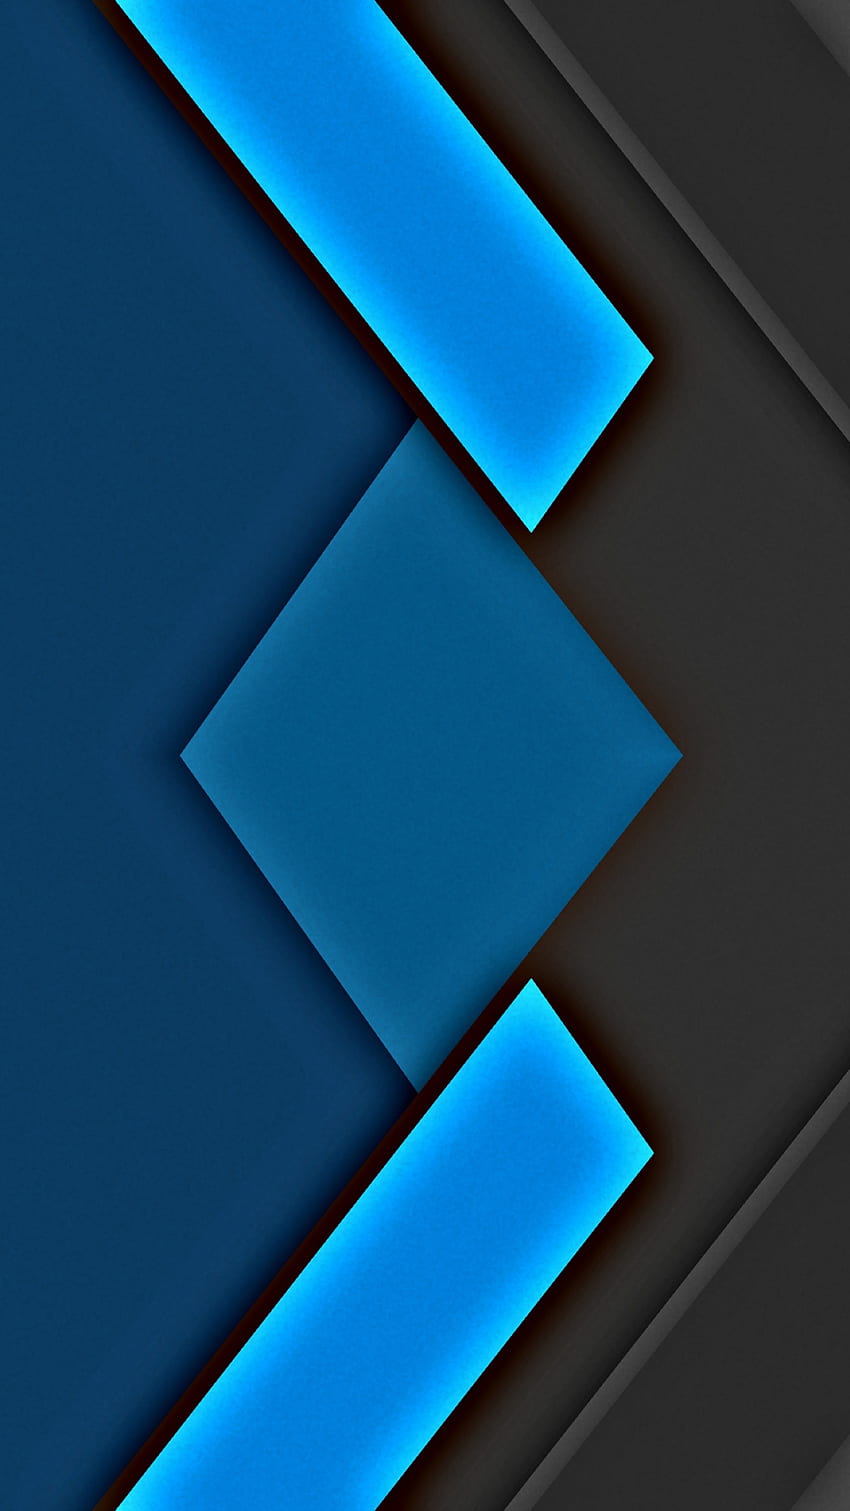 Fsdfs, digital, electric blue, new, blue, material, shapes, texture ...